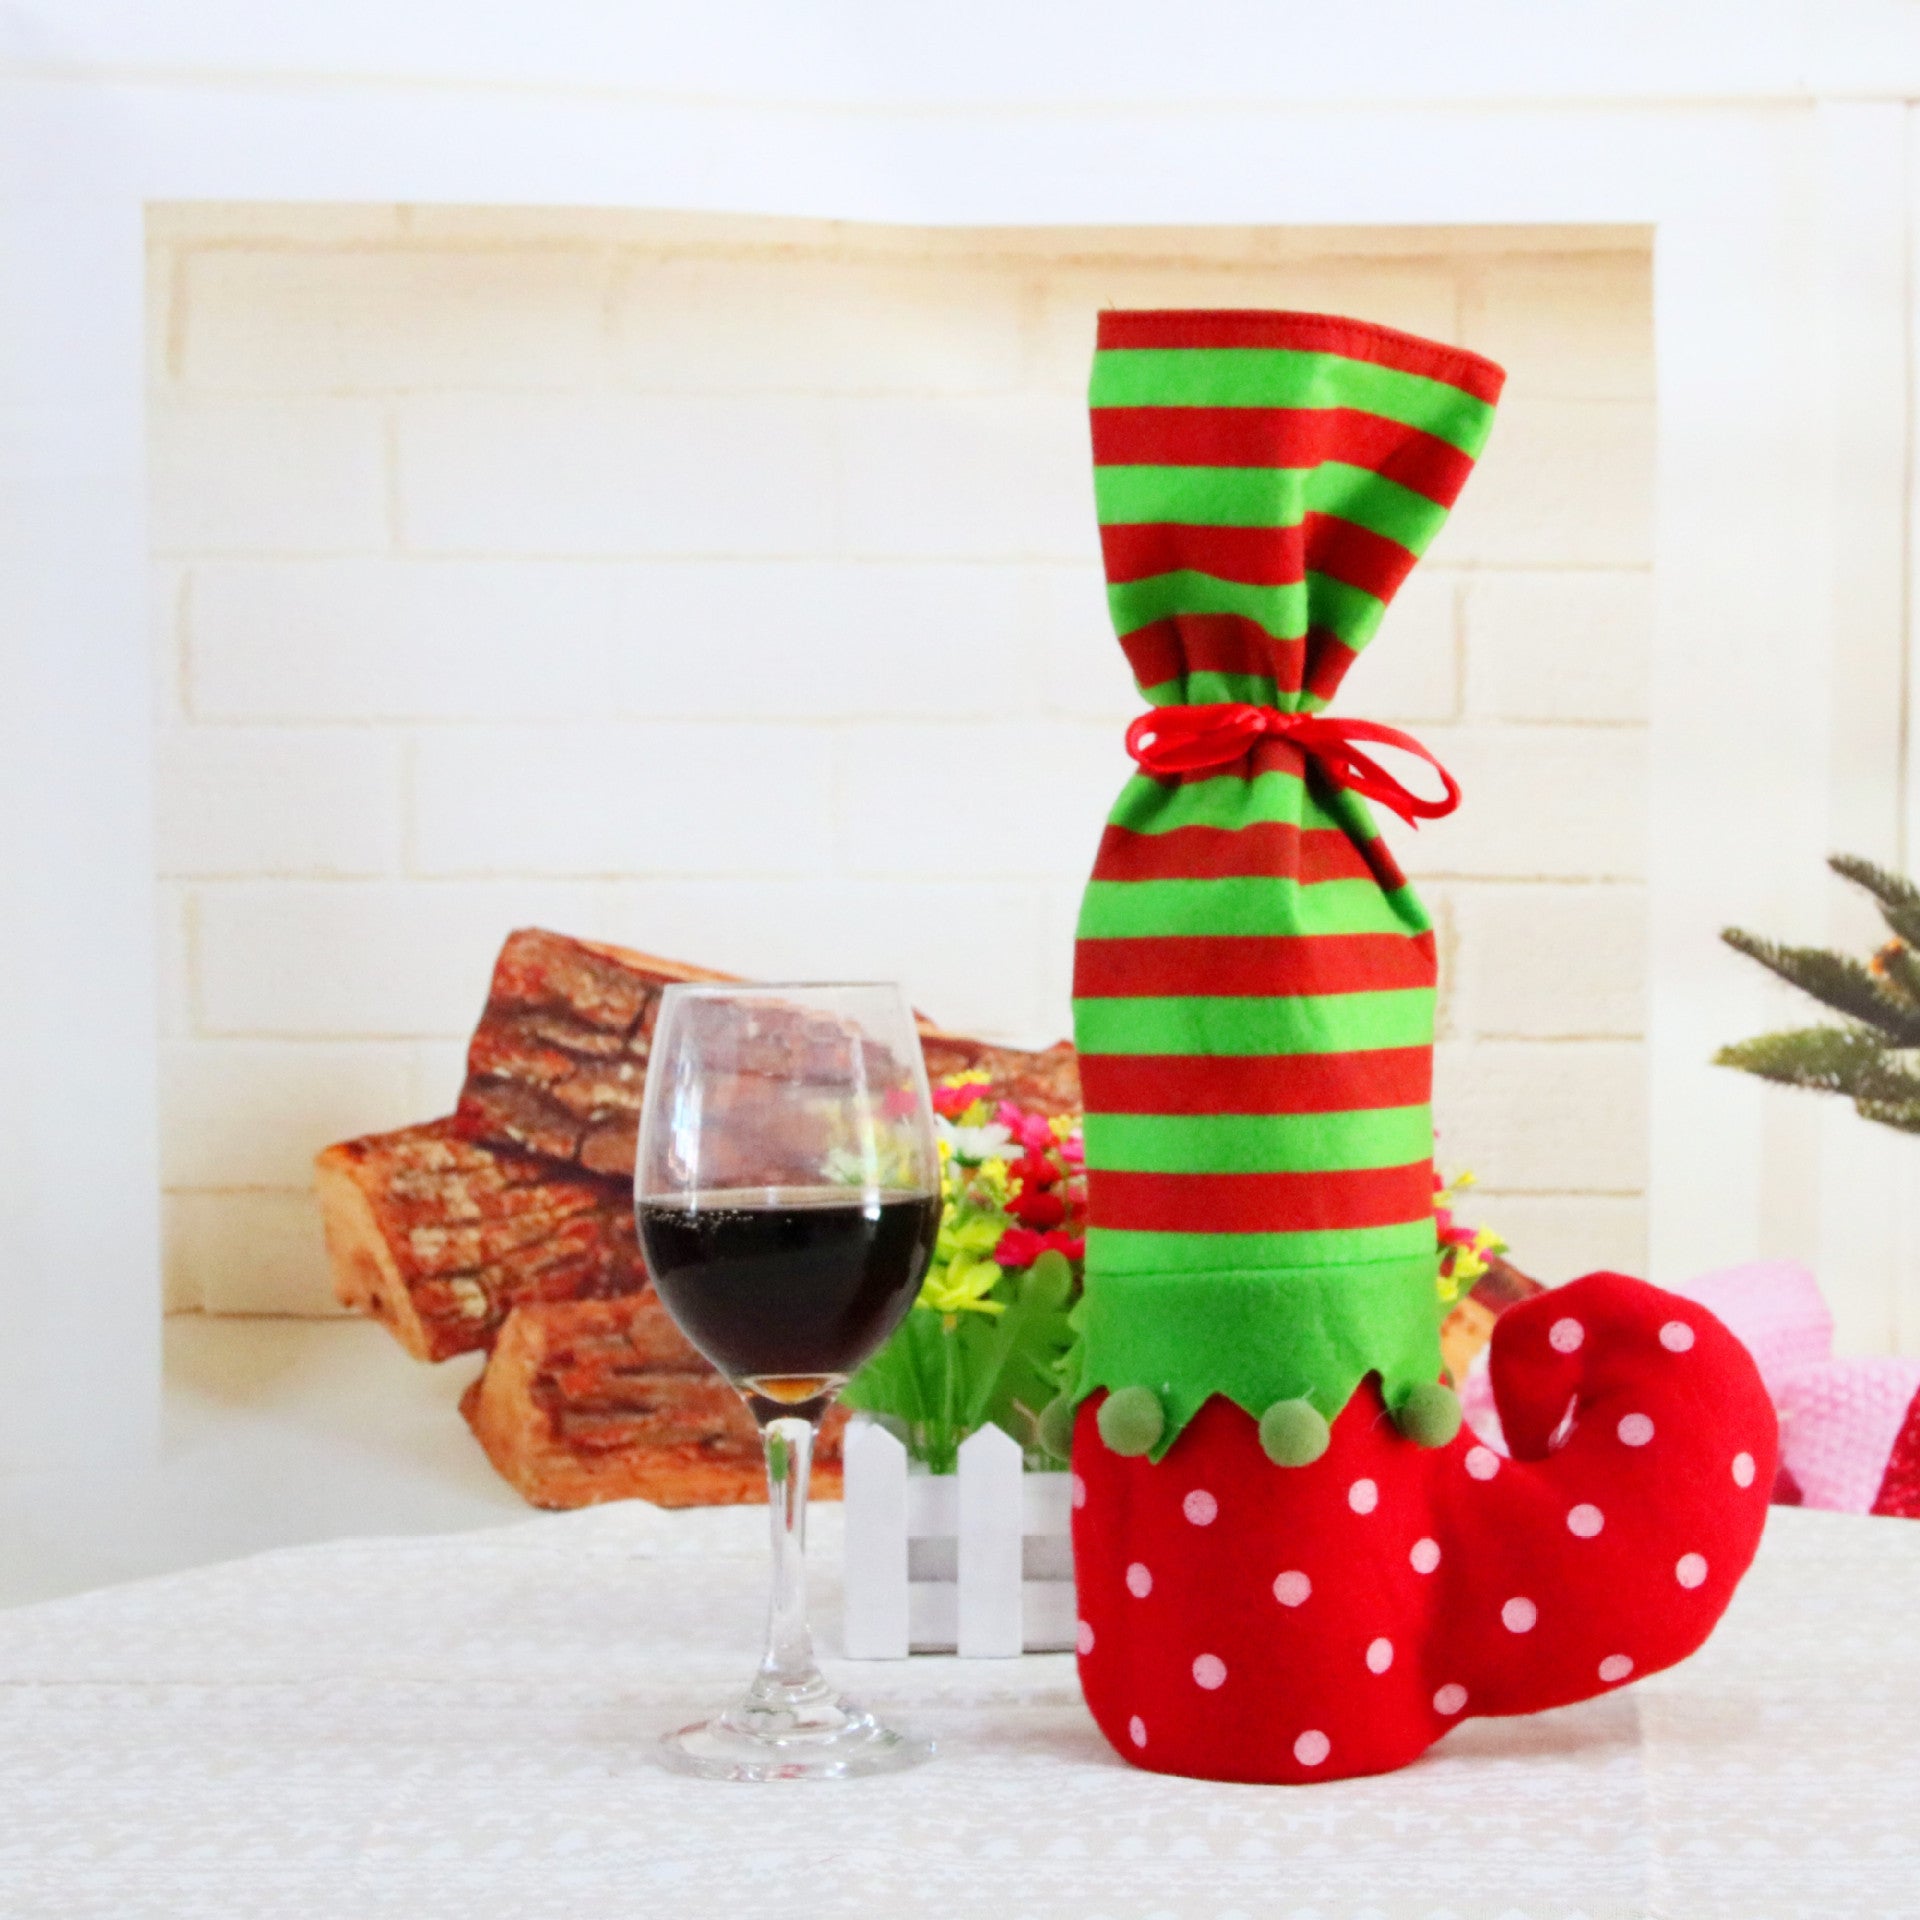 Christmas Wine Bottle Cover, Outdoor and Indoor Christmas decorations Items, Christmas ornaments, Christmas tree decorations, salt dough ornaments, Christmas window decorations, cheap Christmas decorations, snowmen, and ornaments.